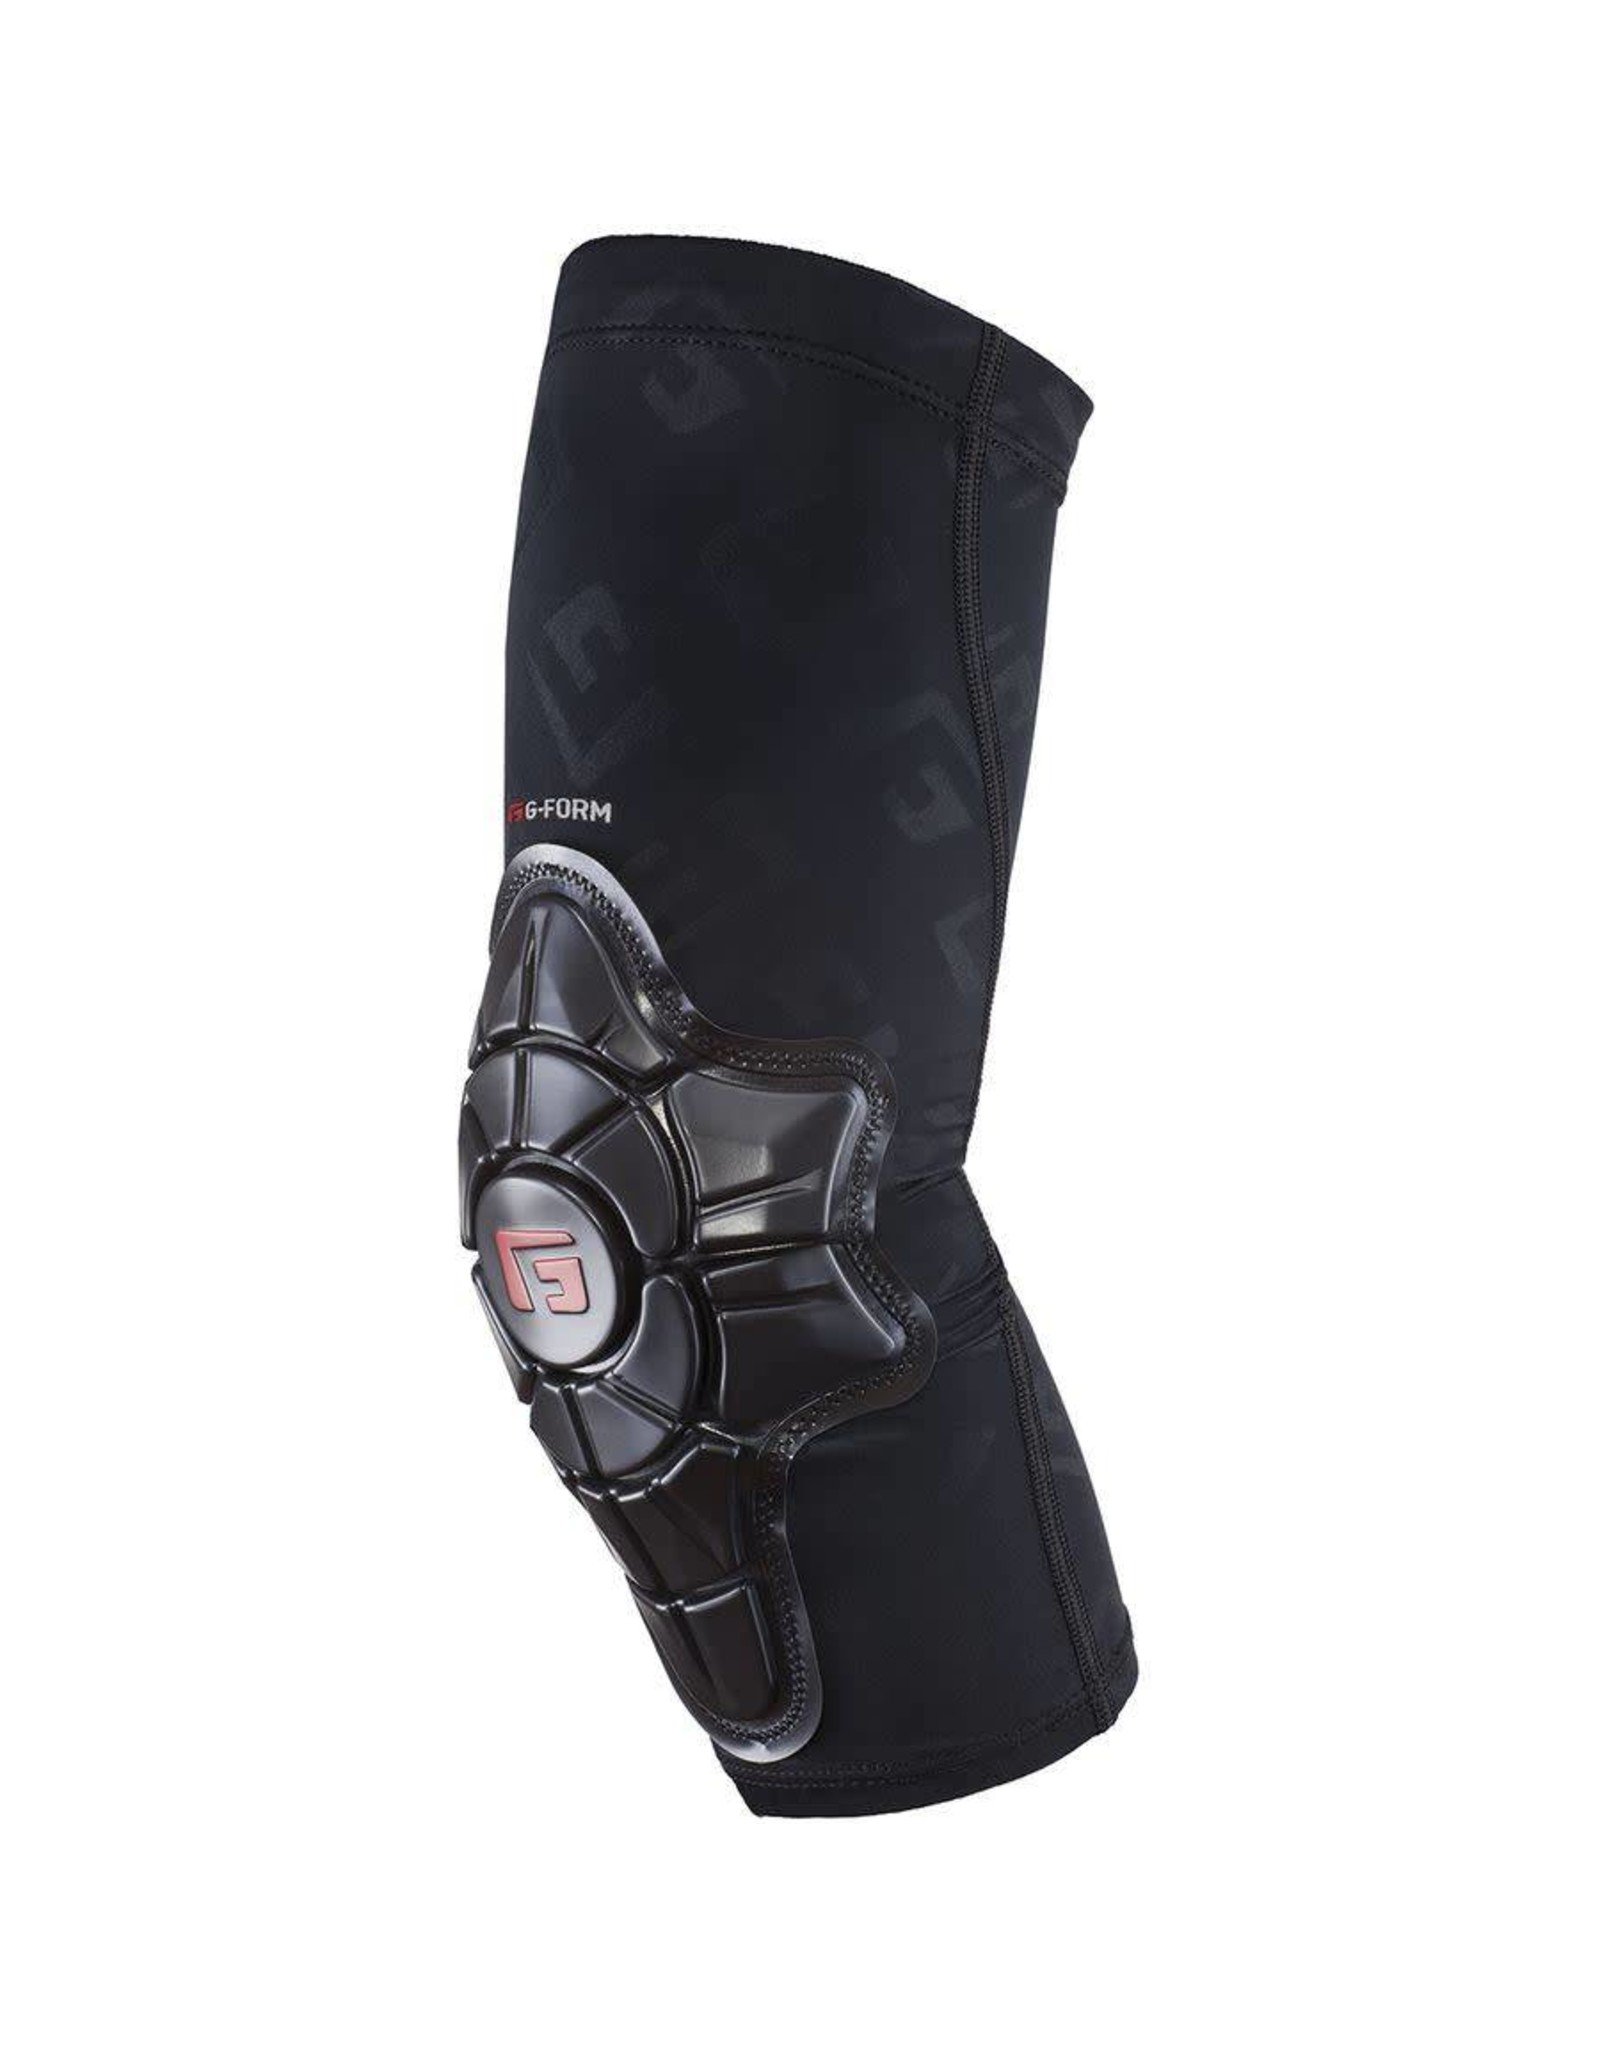 G-Form G-form Pro-x Elbow Pads